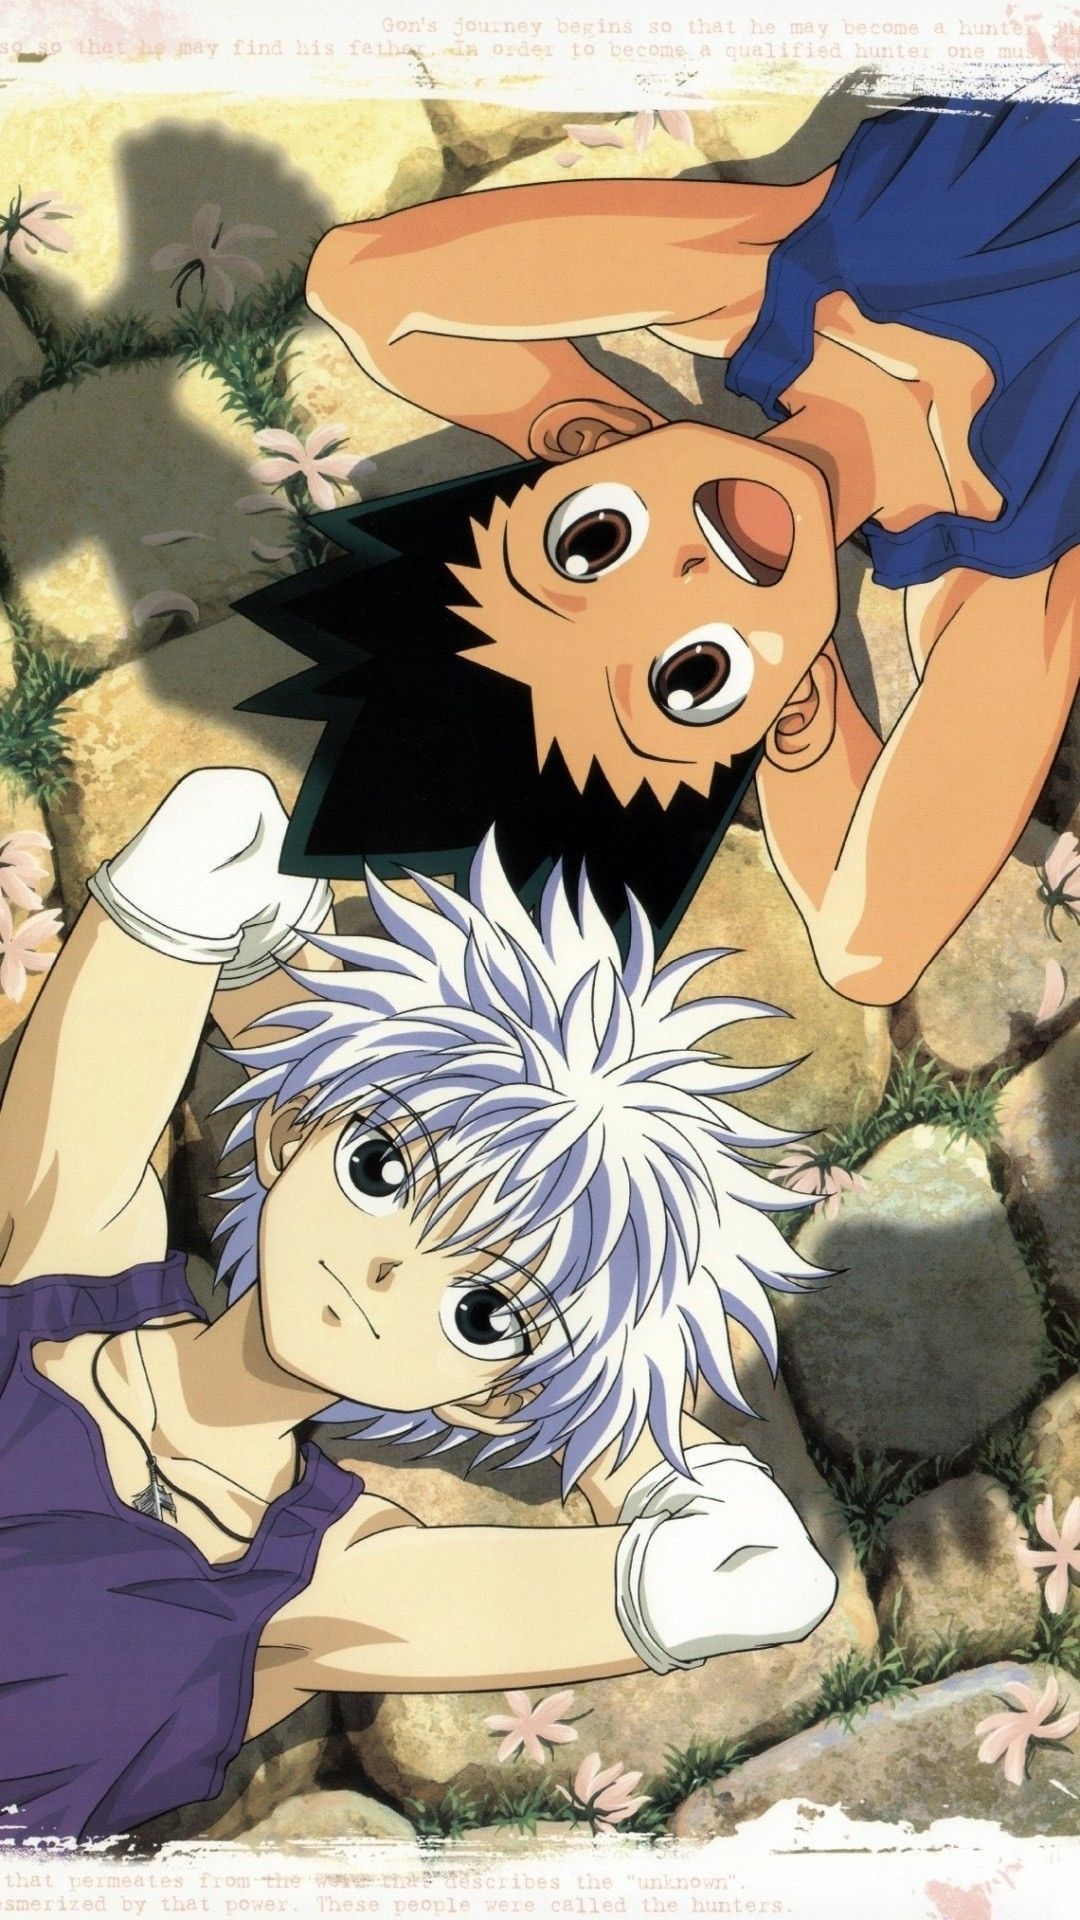 Gon and Killua: The protagonist of the anime Hunter × Hunter, The son of the famous hunter, Ging Freecss. 1080x1920 Full HD Wallpaper.